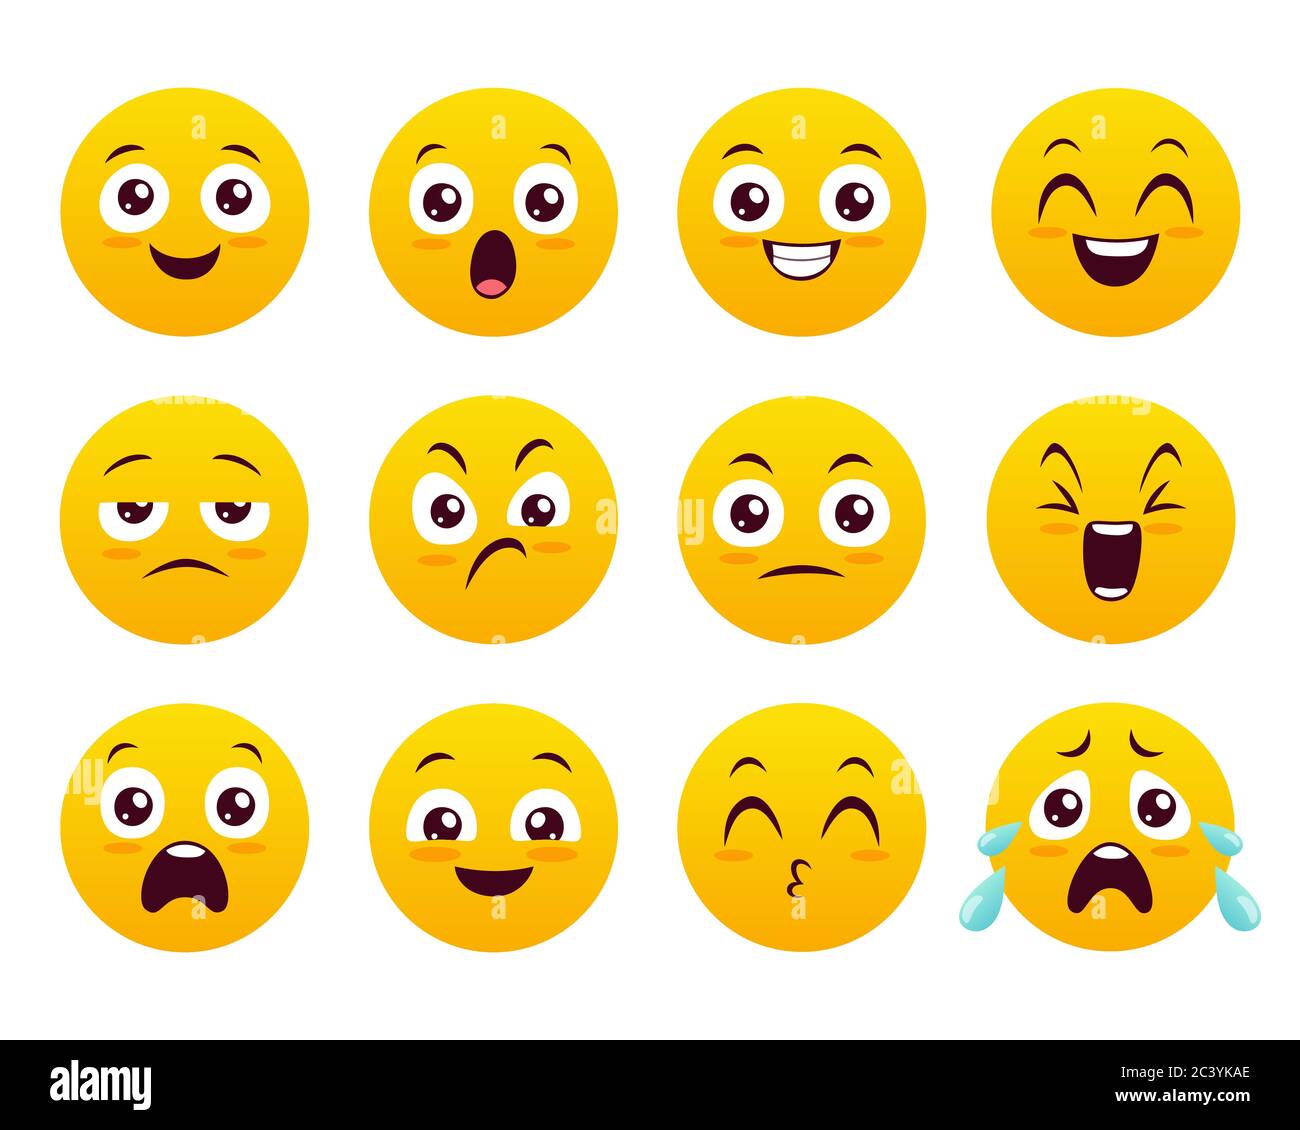 Emoticons icons set. Classic yellow emojis isolated on white background. Cute and funny collection. Set 3 of 5. Stock Vector